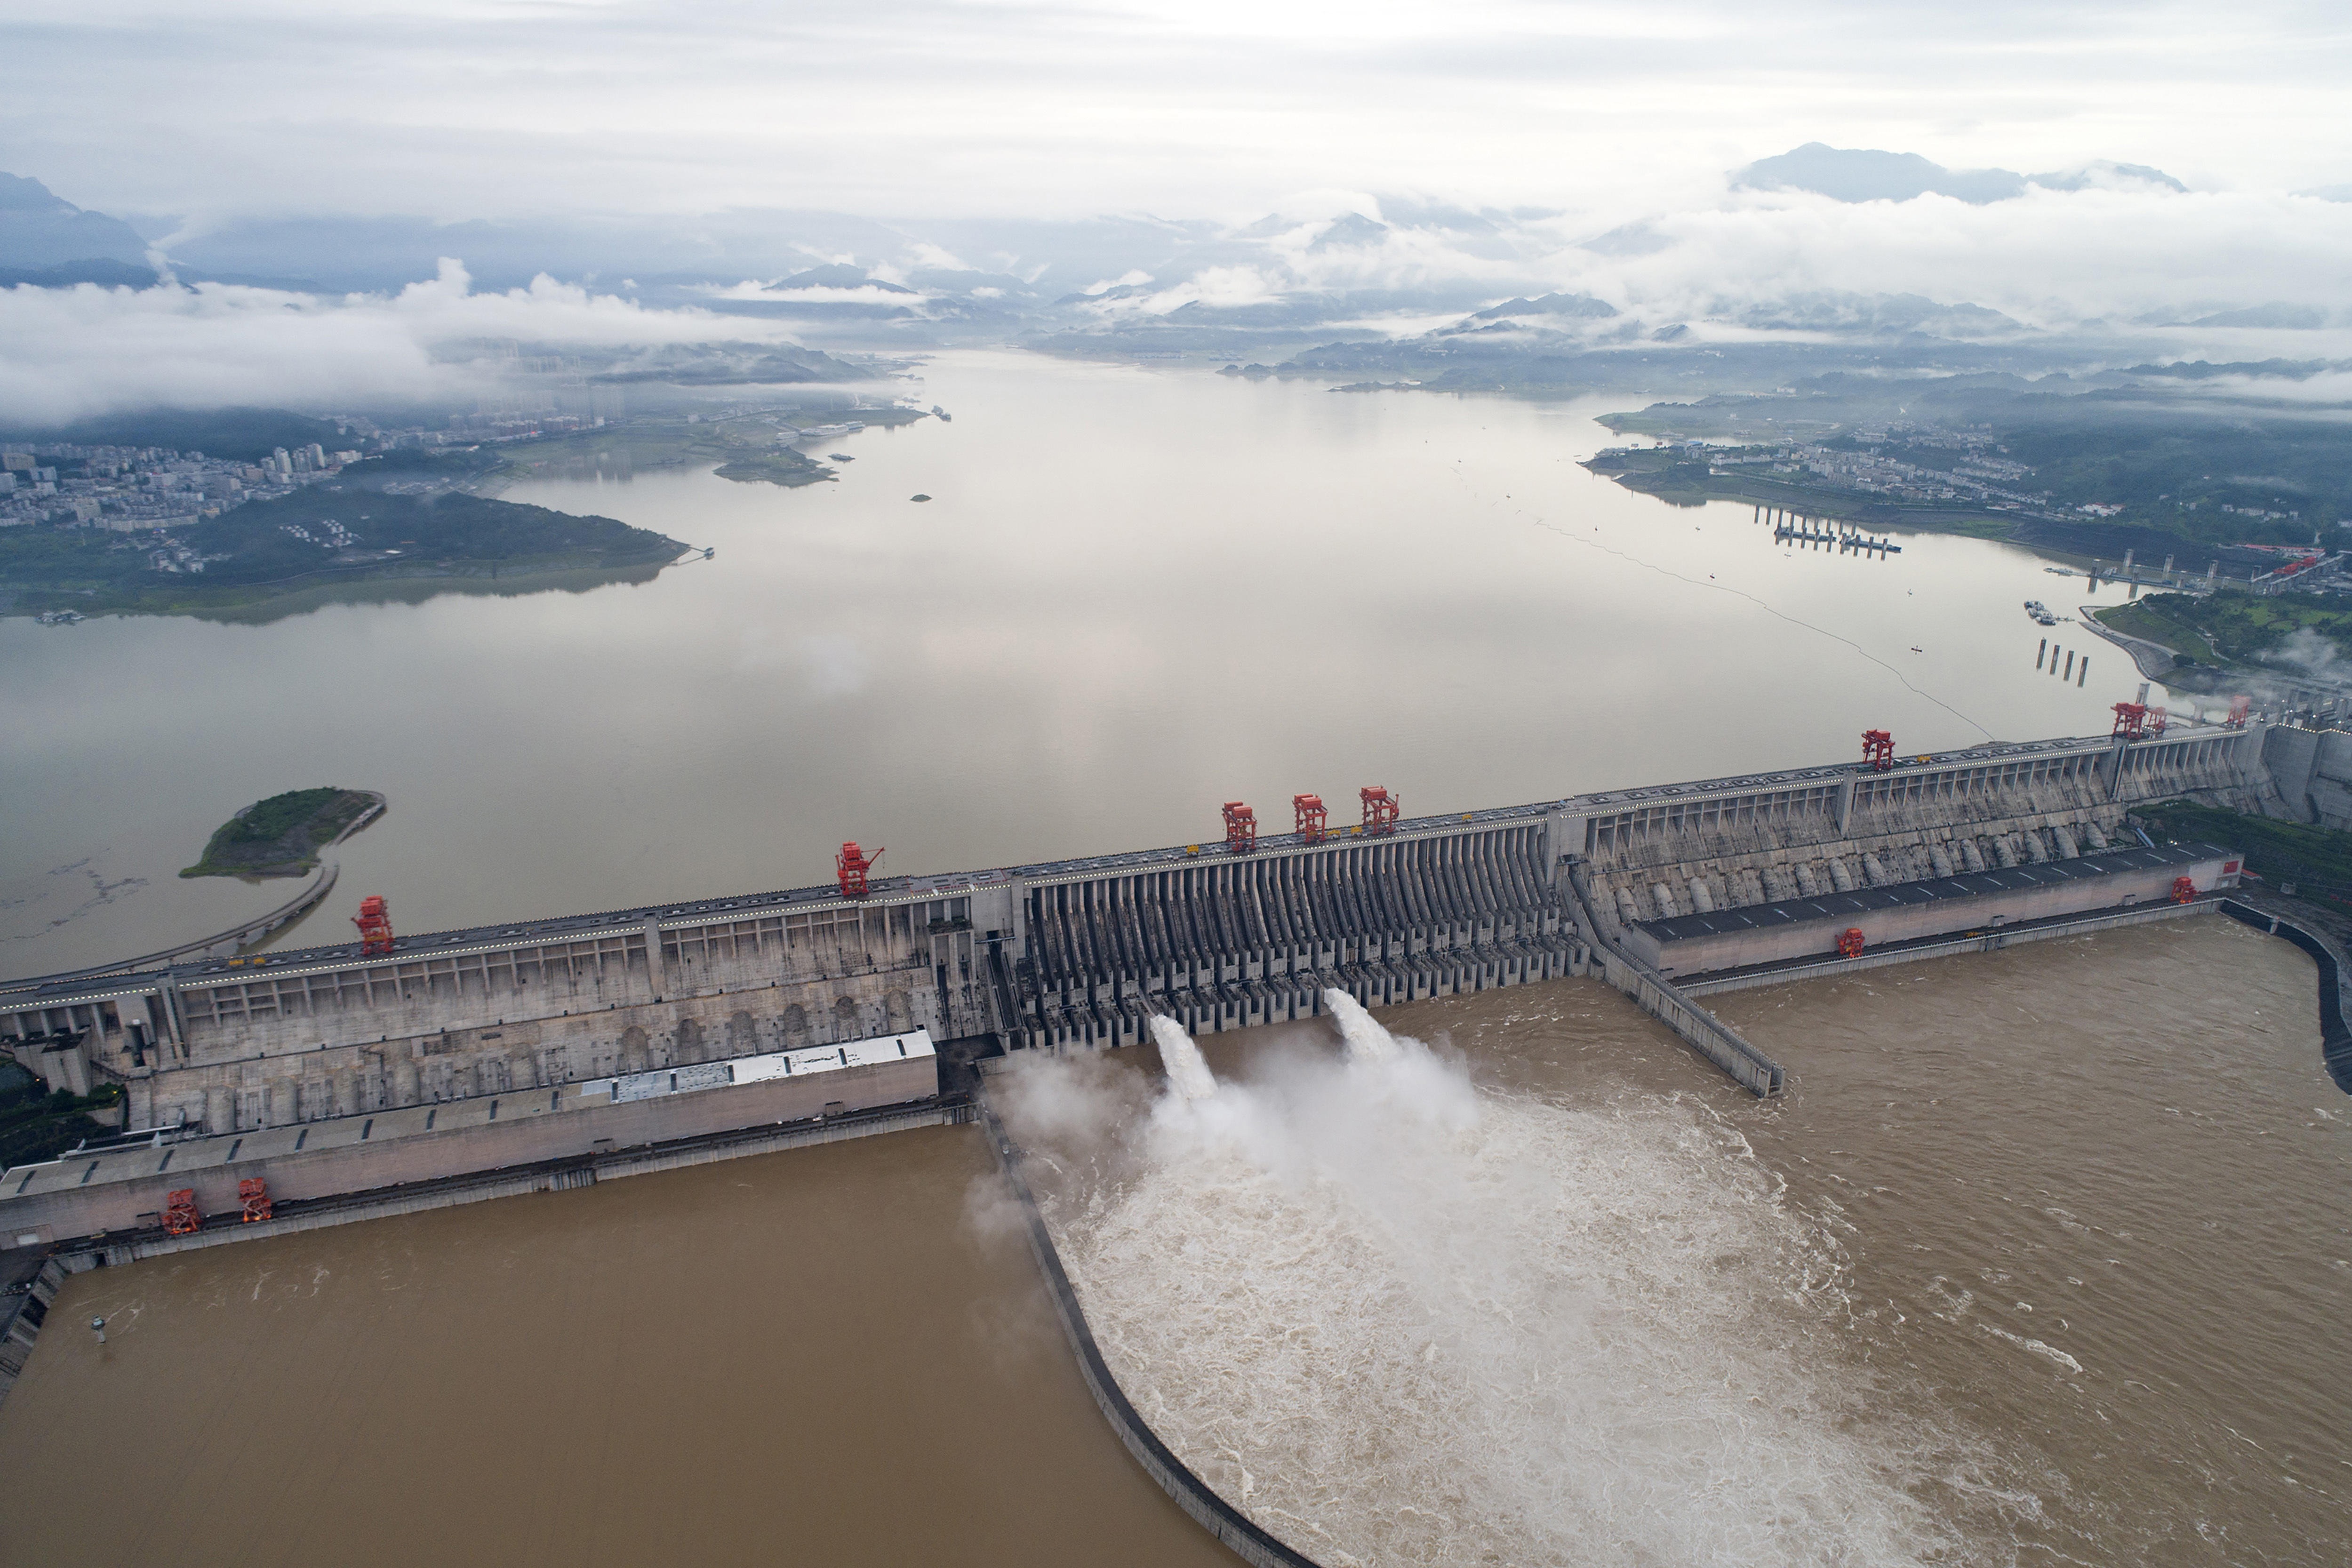 Water flows out from sluiceways at the Three Gorges Dam on the Yangtze River near Yichang in central China's Hubei province